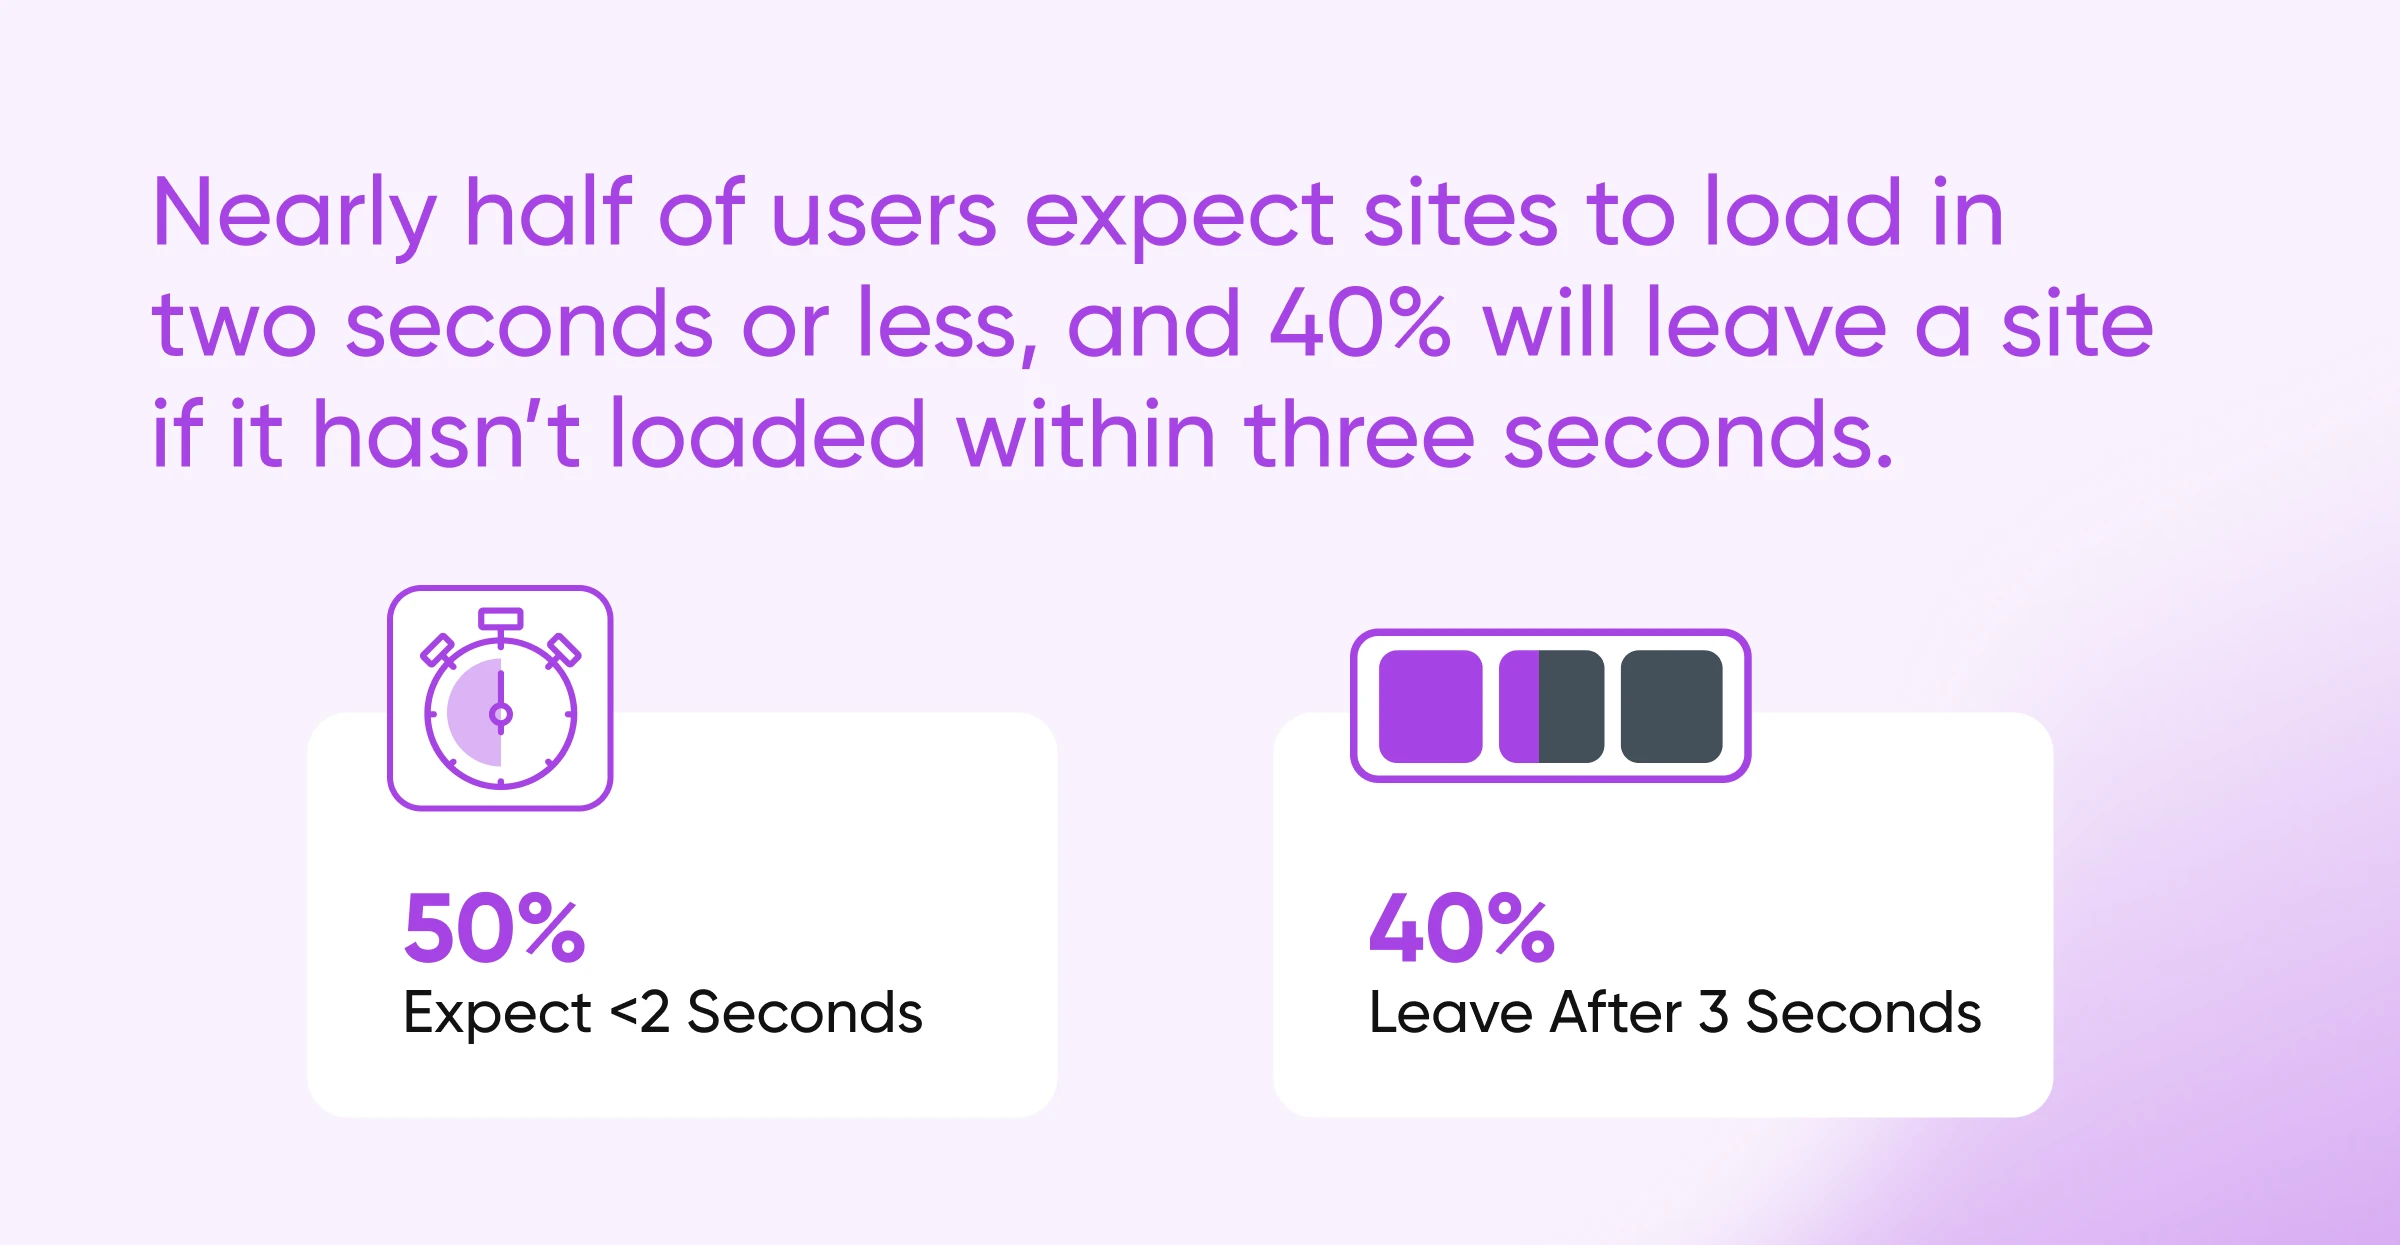 Infographic showing how 50% of users expect sites to load in under 2 seconds, and 40% leave after 3 seconds. 